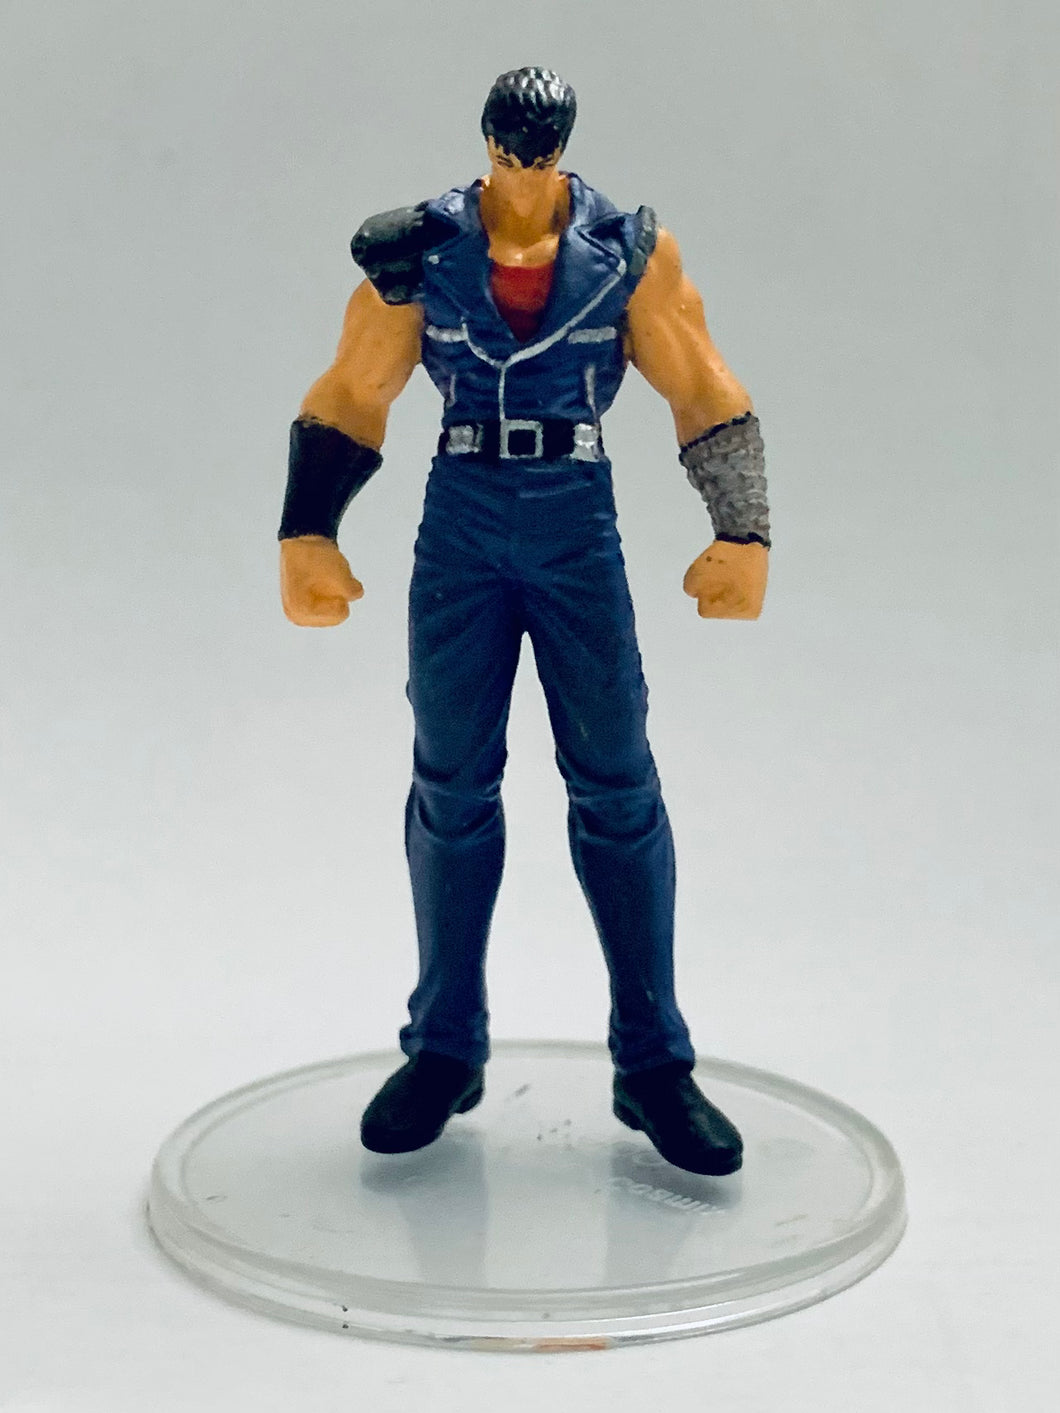 Hokuto no Ken - Kenshirou - Fist of the North Star All-Star Retsuden Capsule Figure Collection Part 1